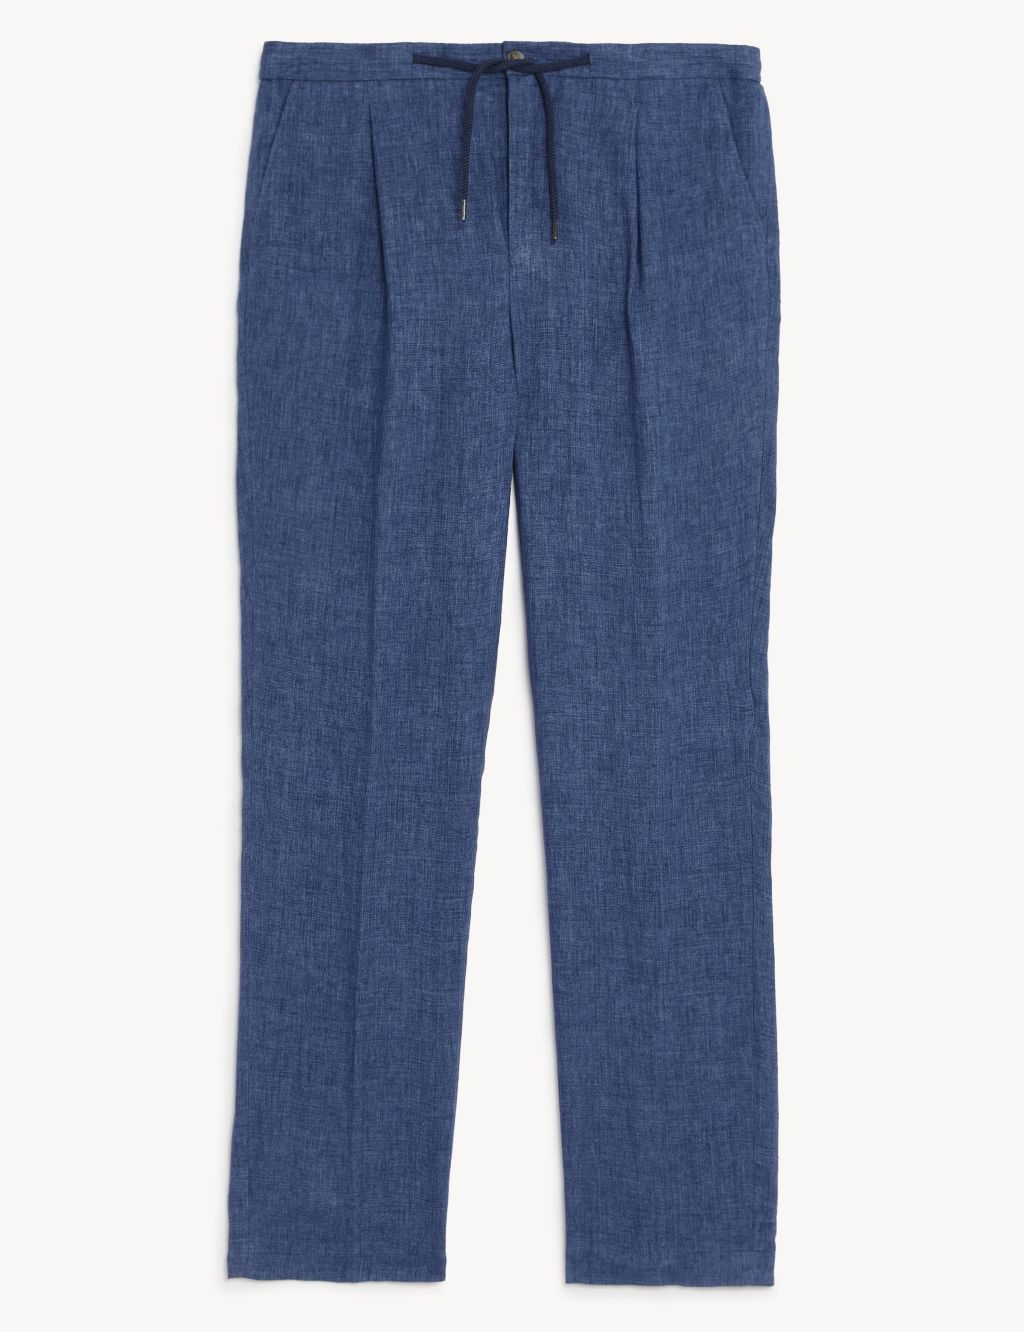 Tailored Fit Pure Linen Trousers image 2